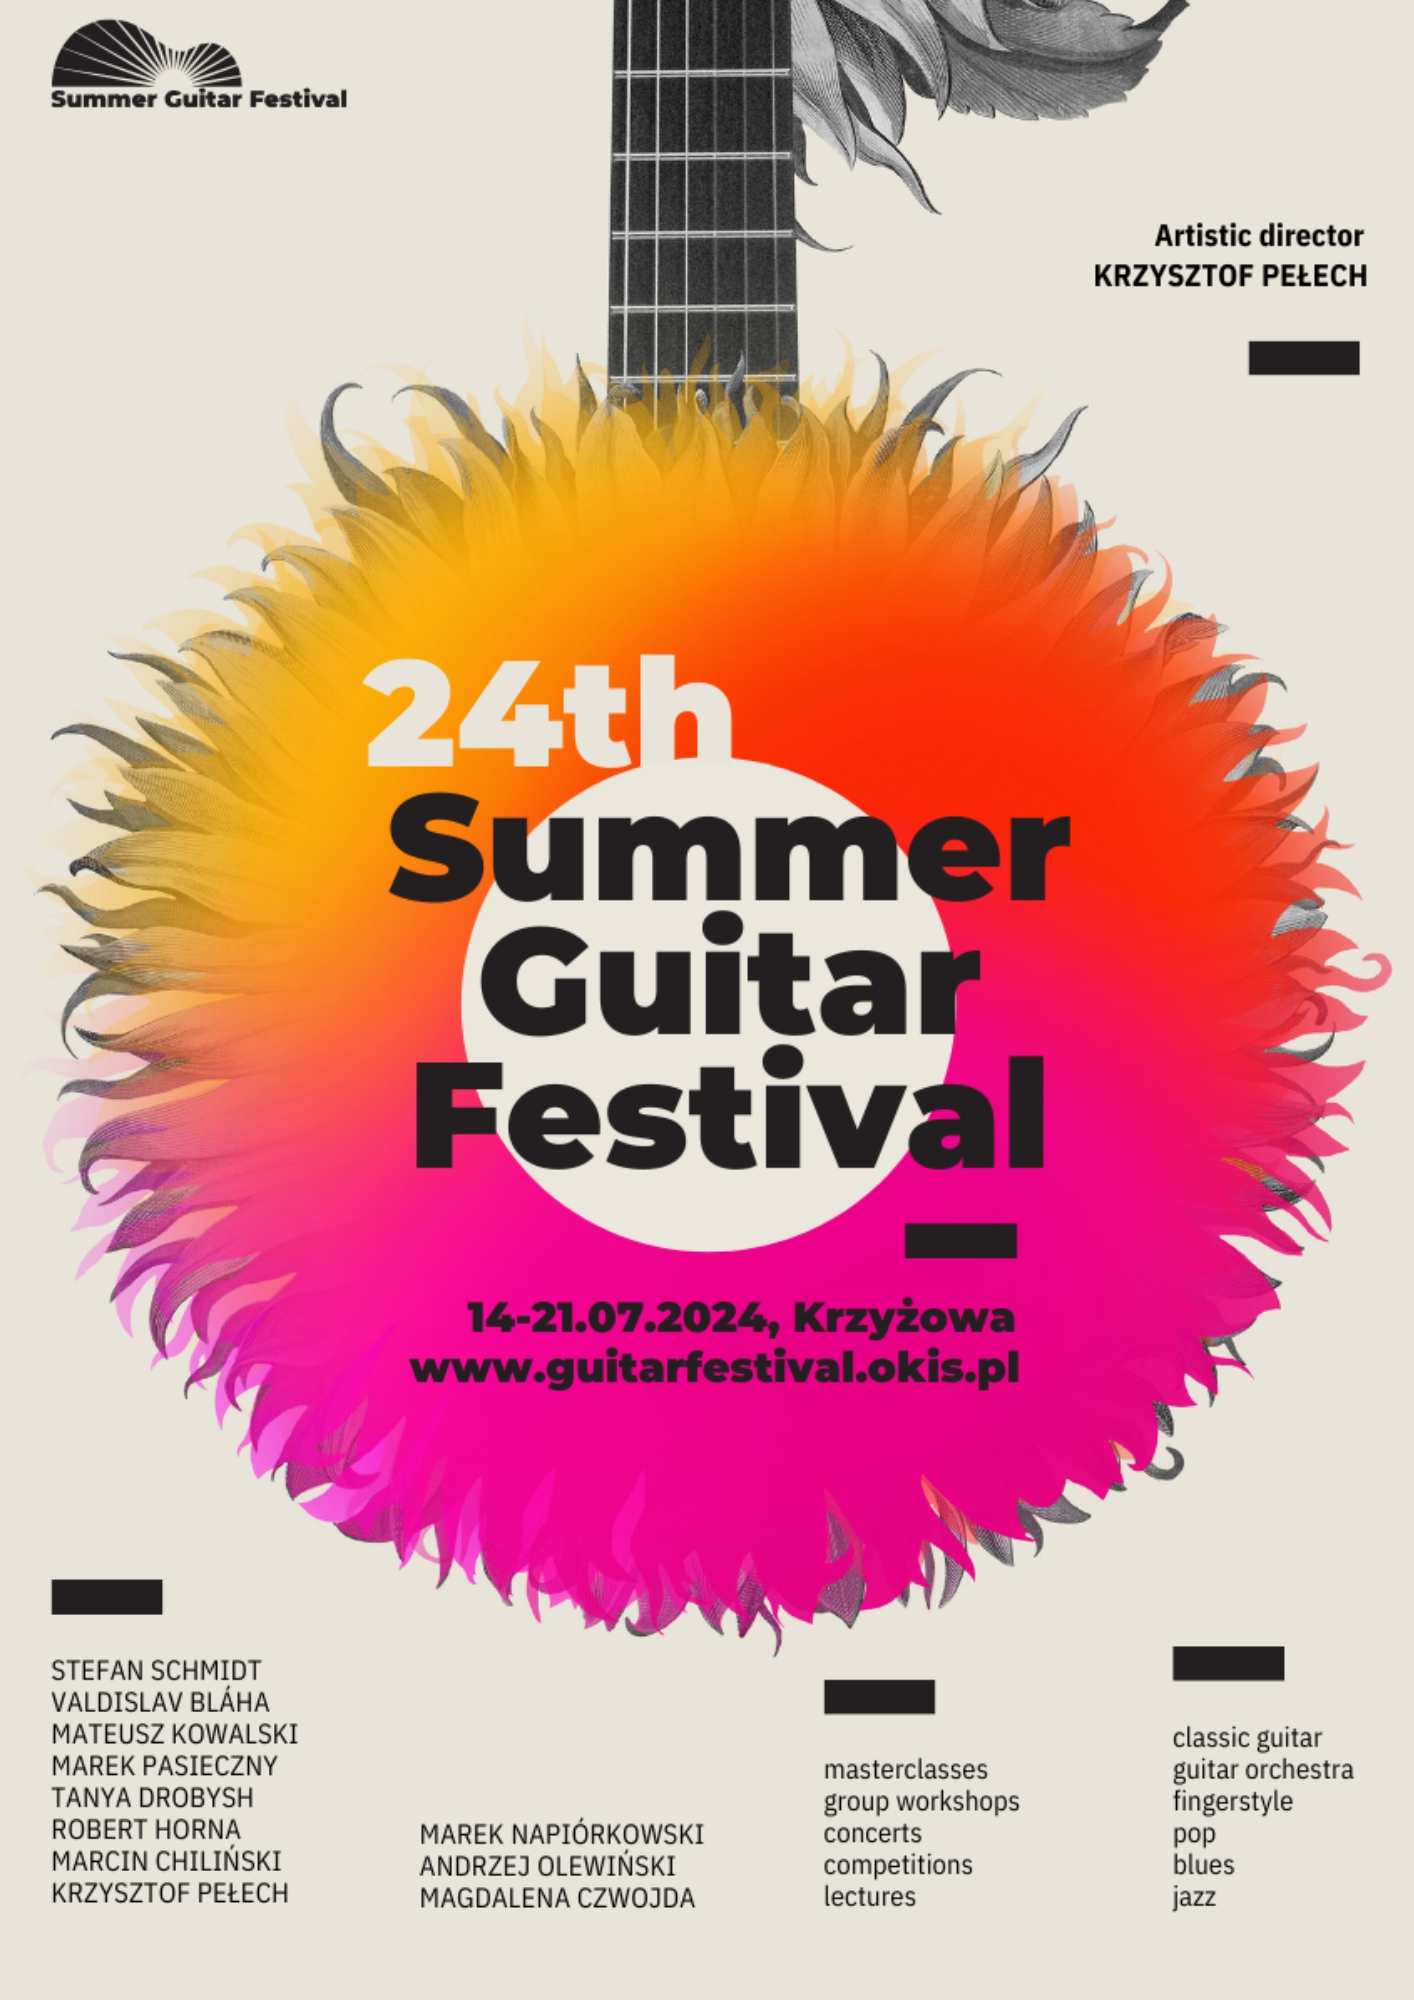 We invite you to participate in the 24th Summer Guitar Festival - Krzyżowa, 14-21.07.2024